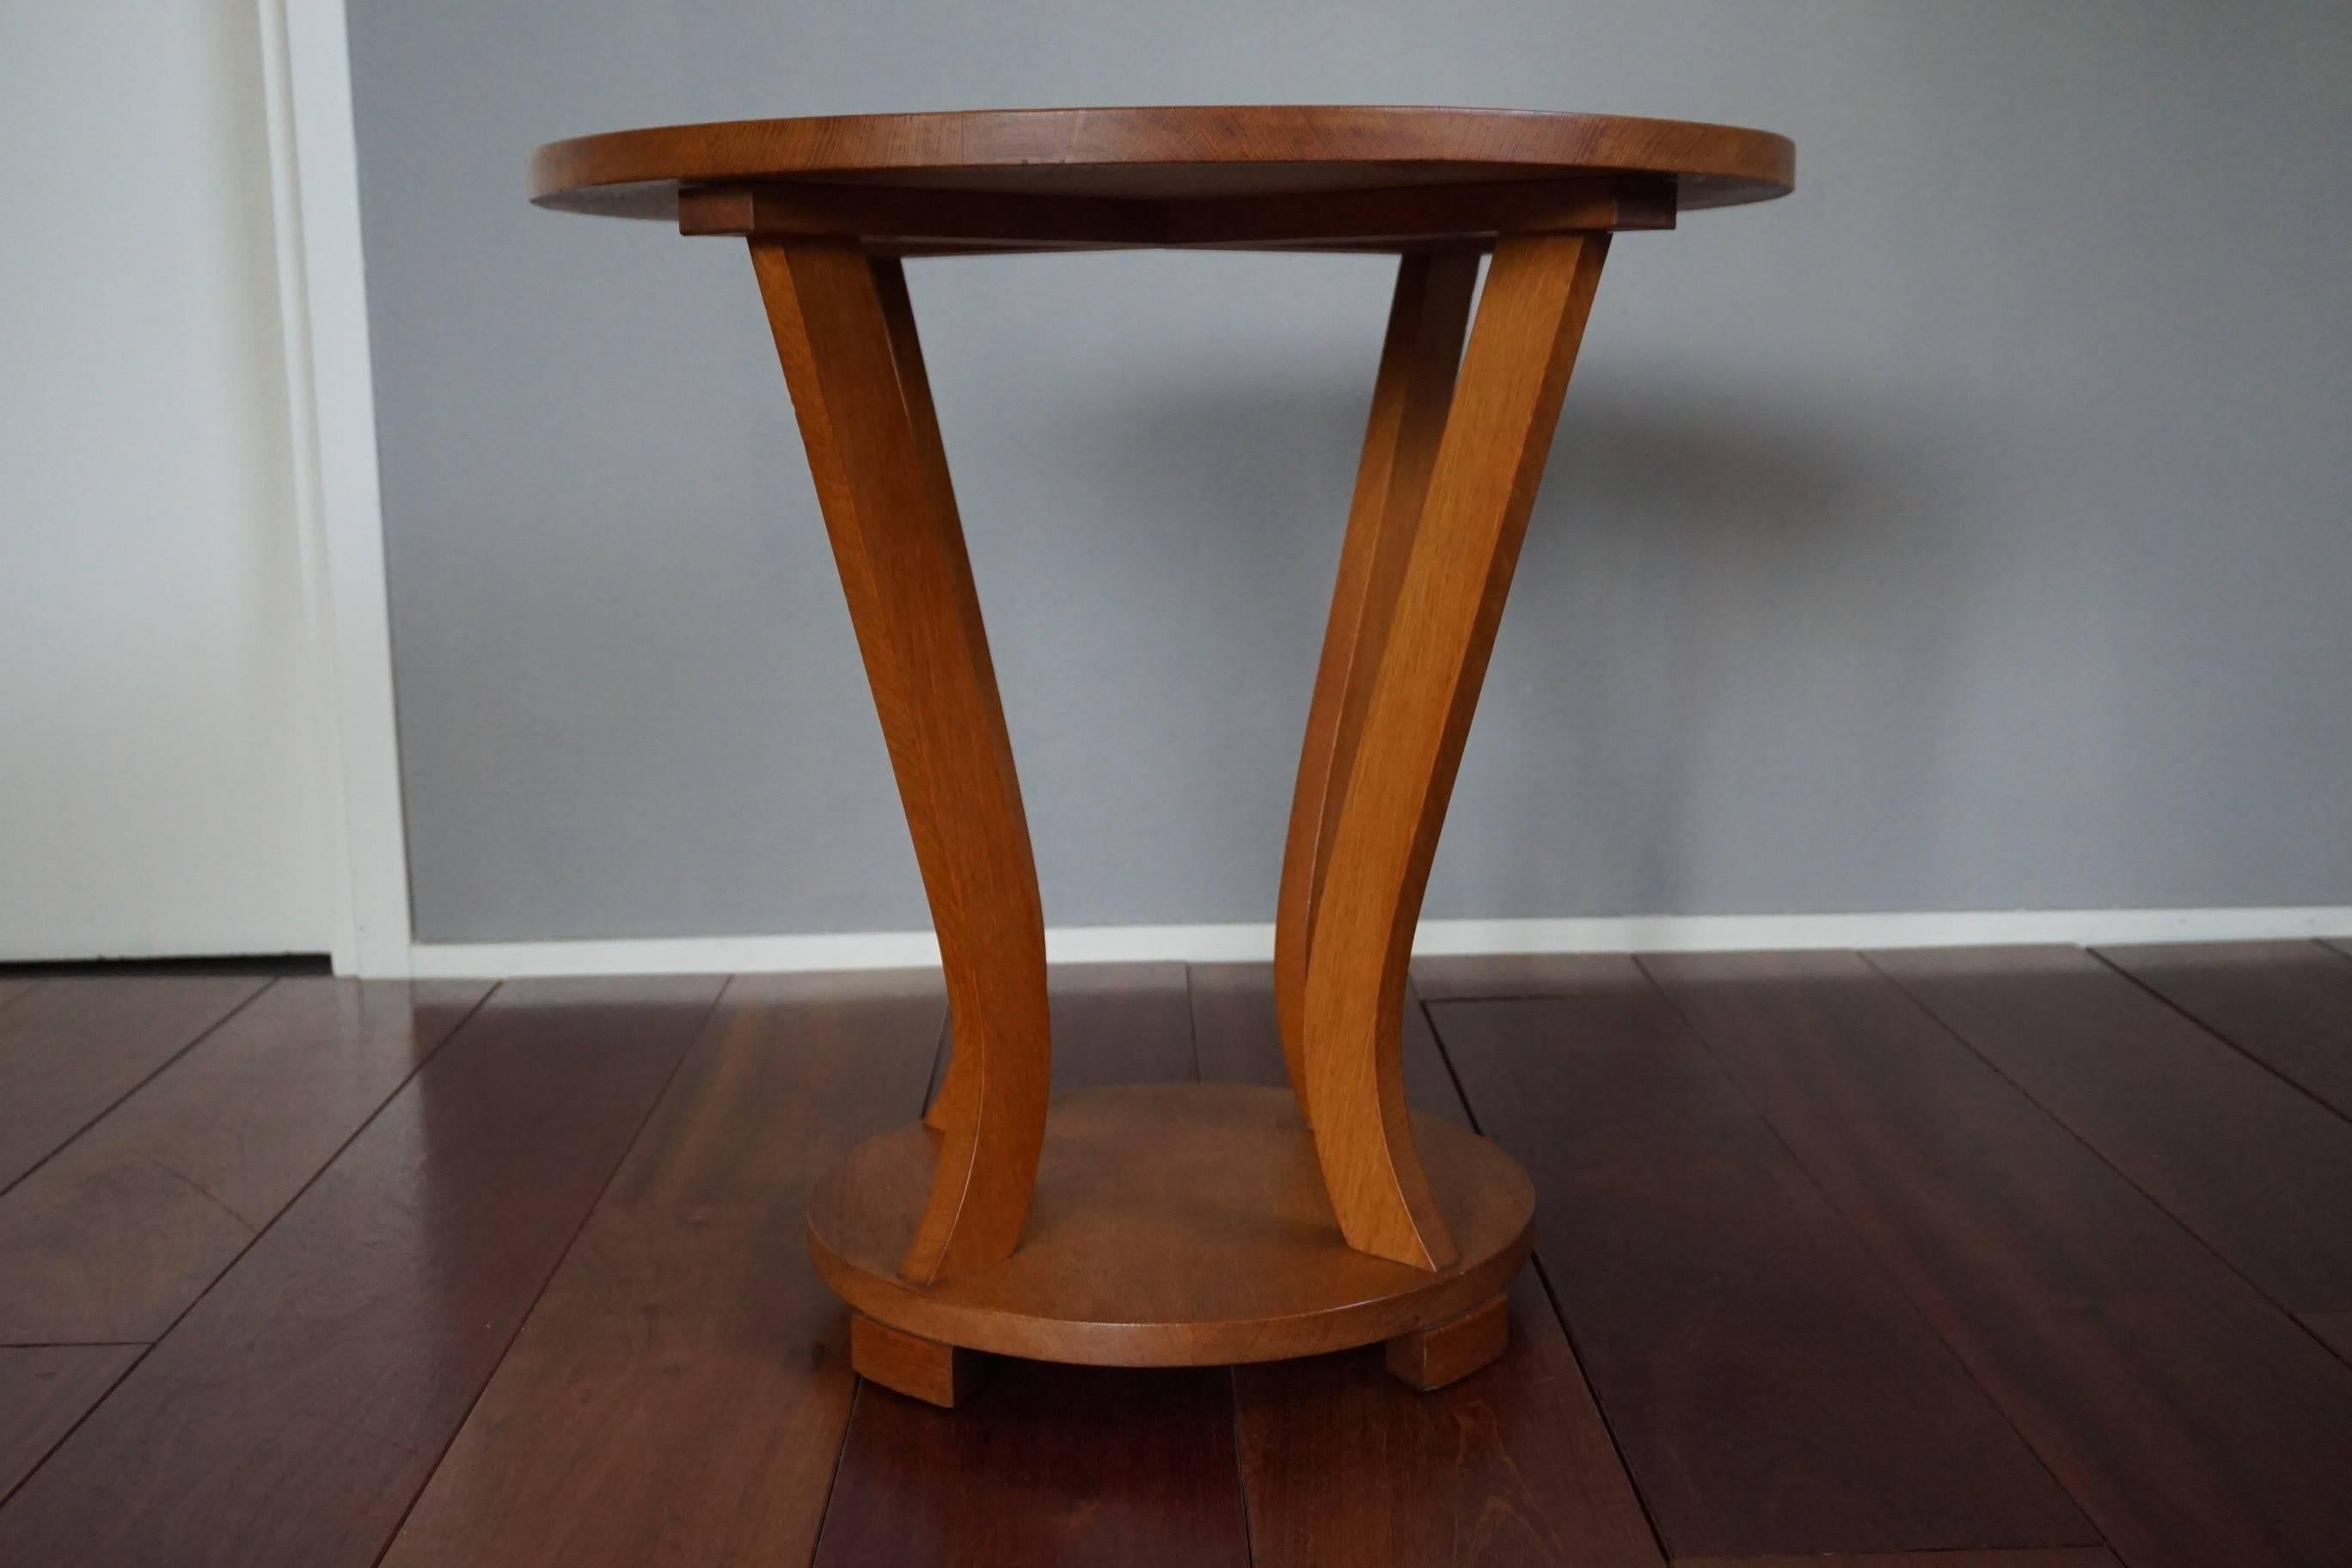 Beautiful design and excellent condition Art Deco table.

For us to find this beautifully symmetrical Art Deco table in this excellent and unrestored condition, again, felt like a blessing. The unusual, circular base and top with the avantgardistic